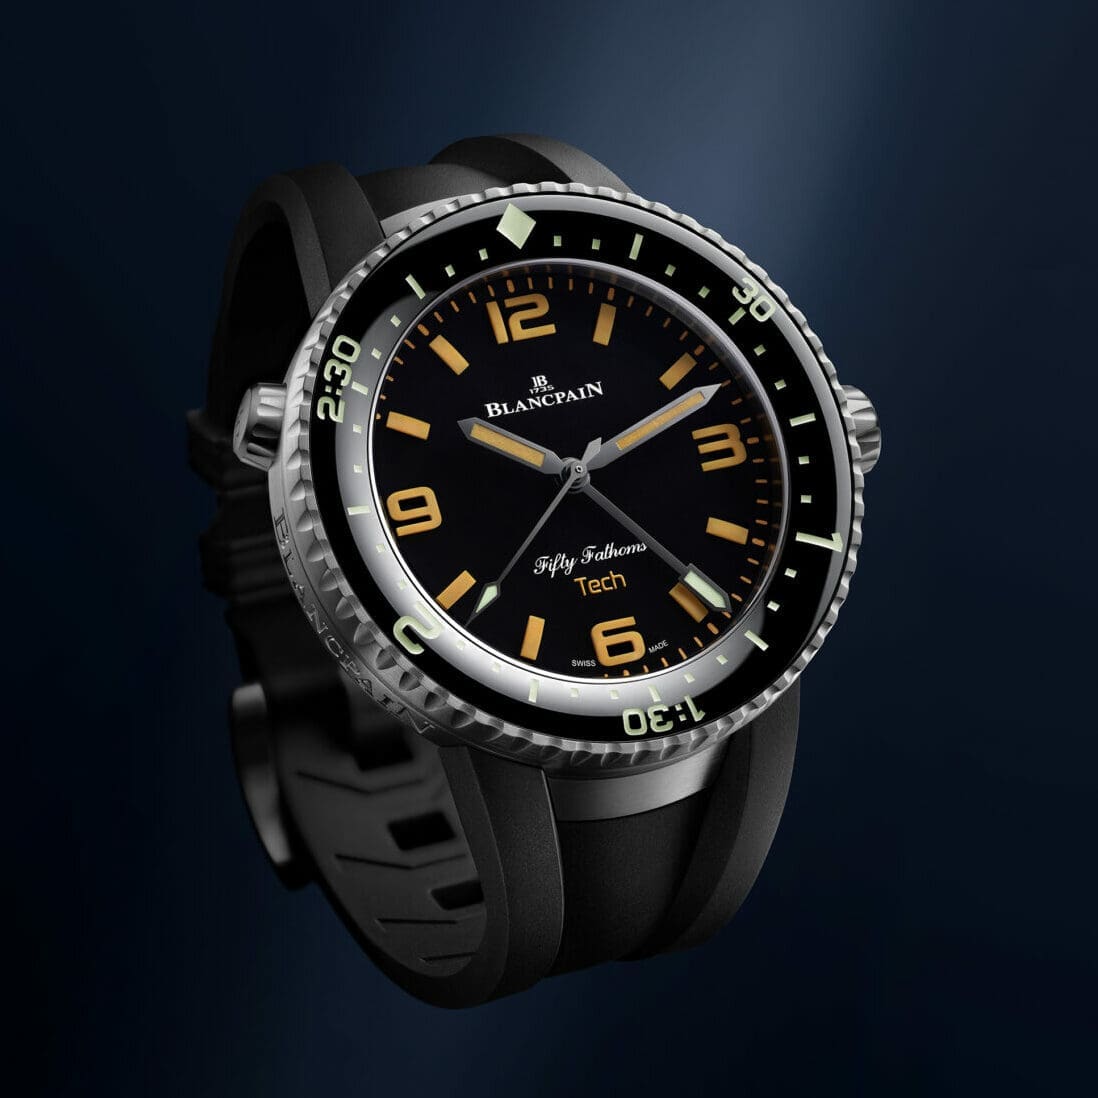 The Blancpain Fifty Fathoms Tech Gombessa is “a pure diving instrument” for the modern age